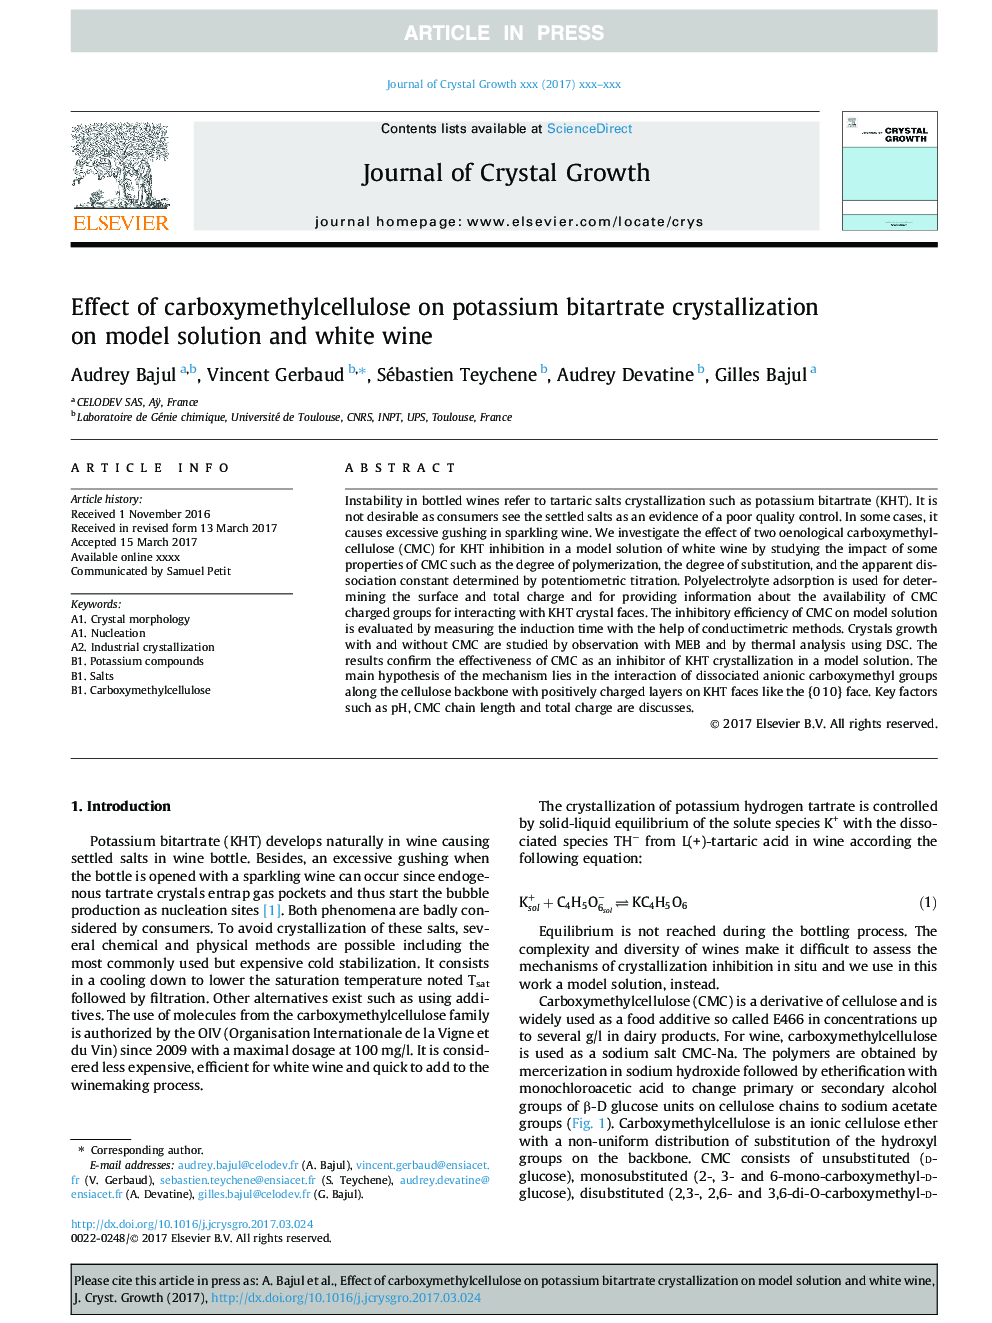 Effect of carboxymethylcellulose on potassium bitartrate crystallization on model solution and white wine